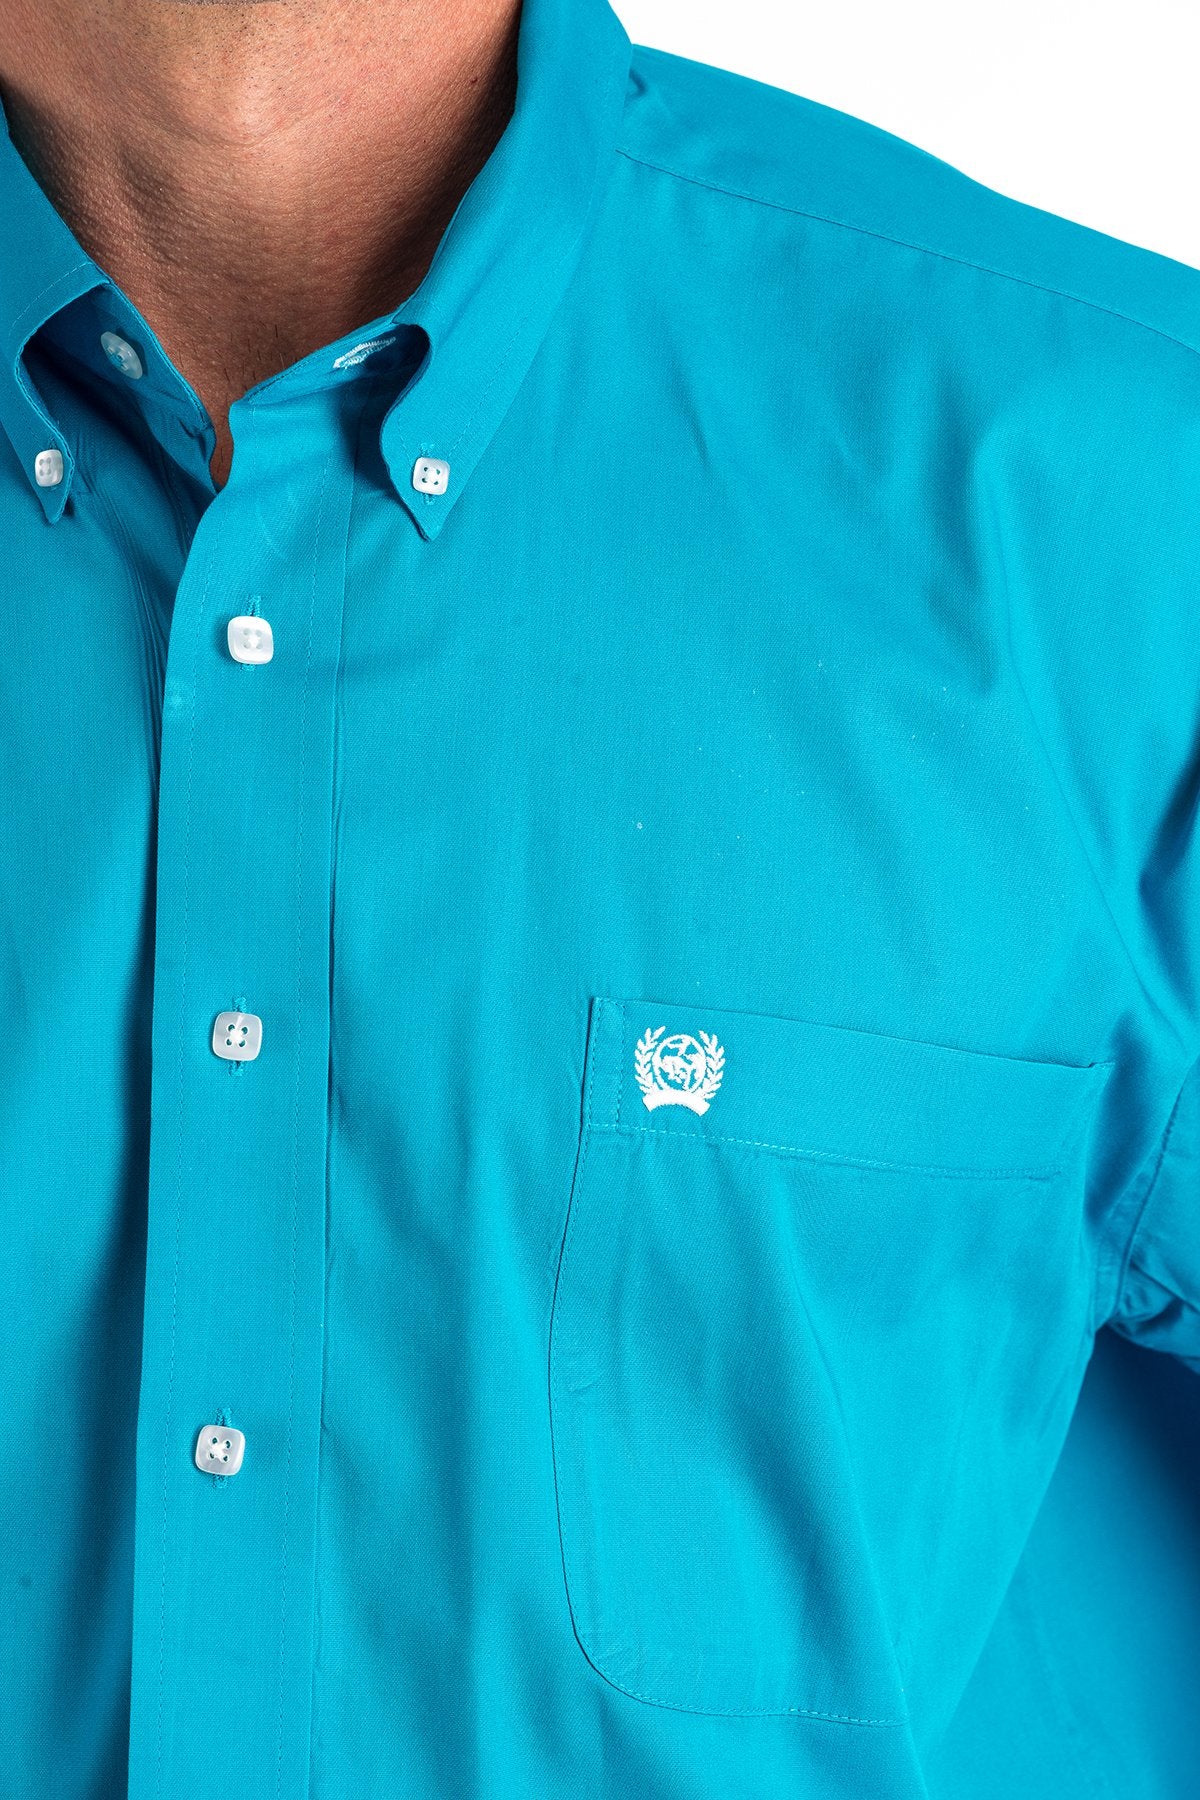 Cinch Solid Turquoise L/S Shirt- MTW1103800